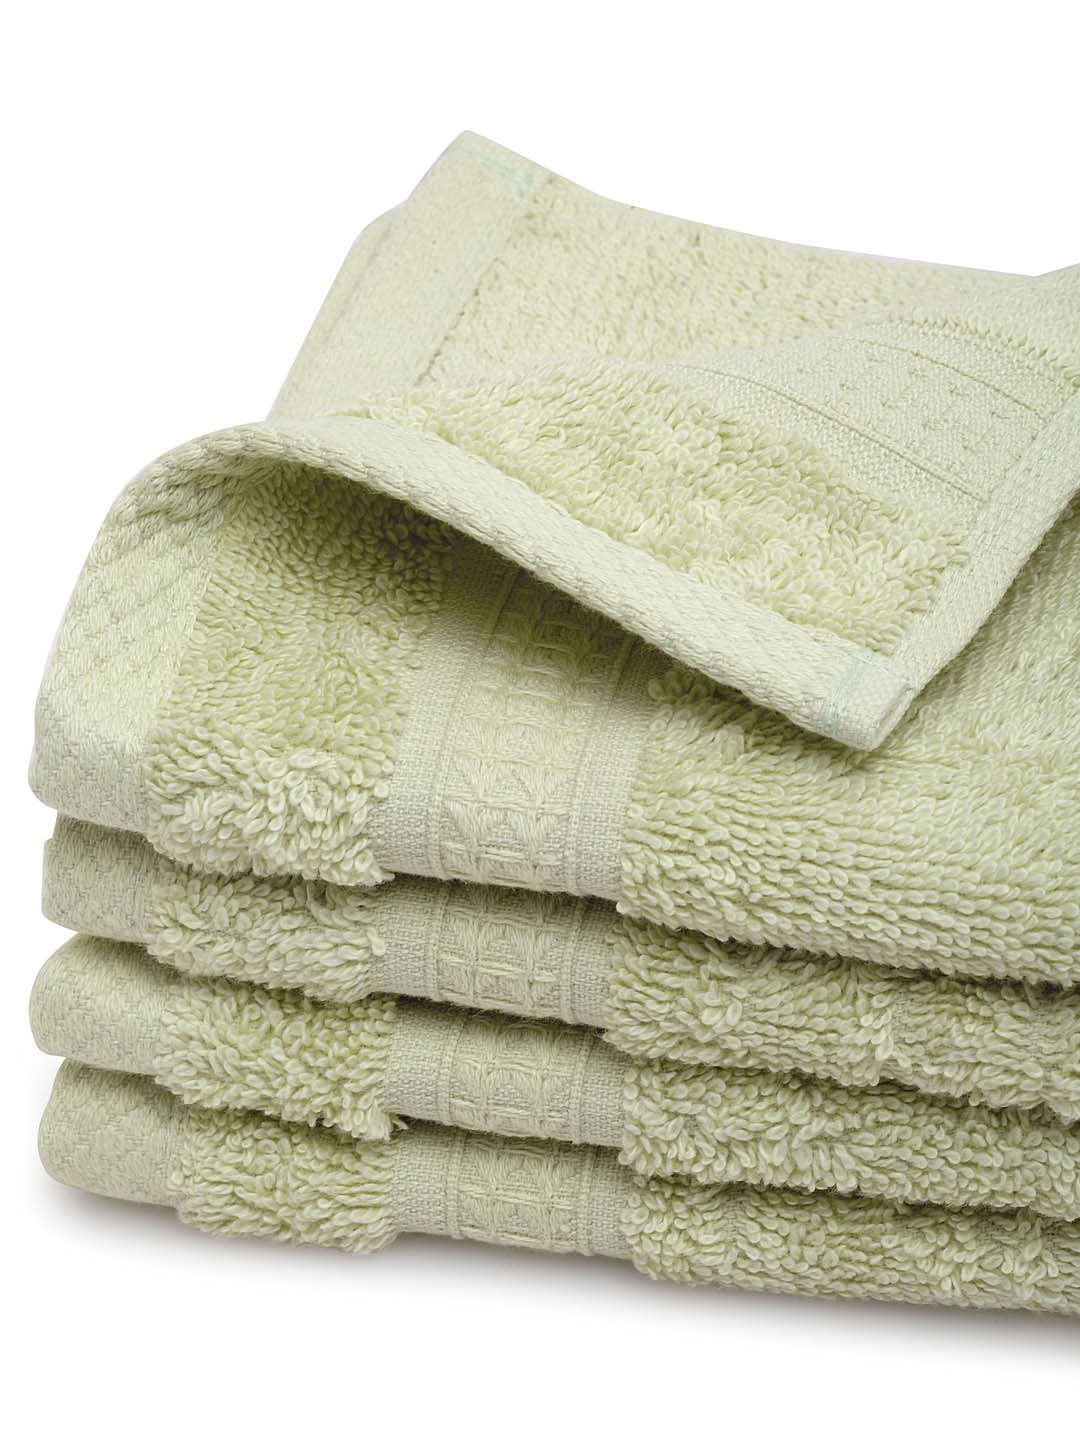 Spaces Organic 4 Pieces Face Towels (Green)